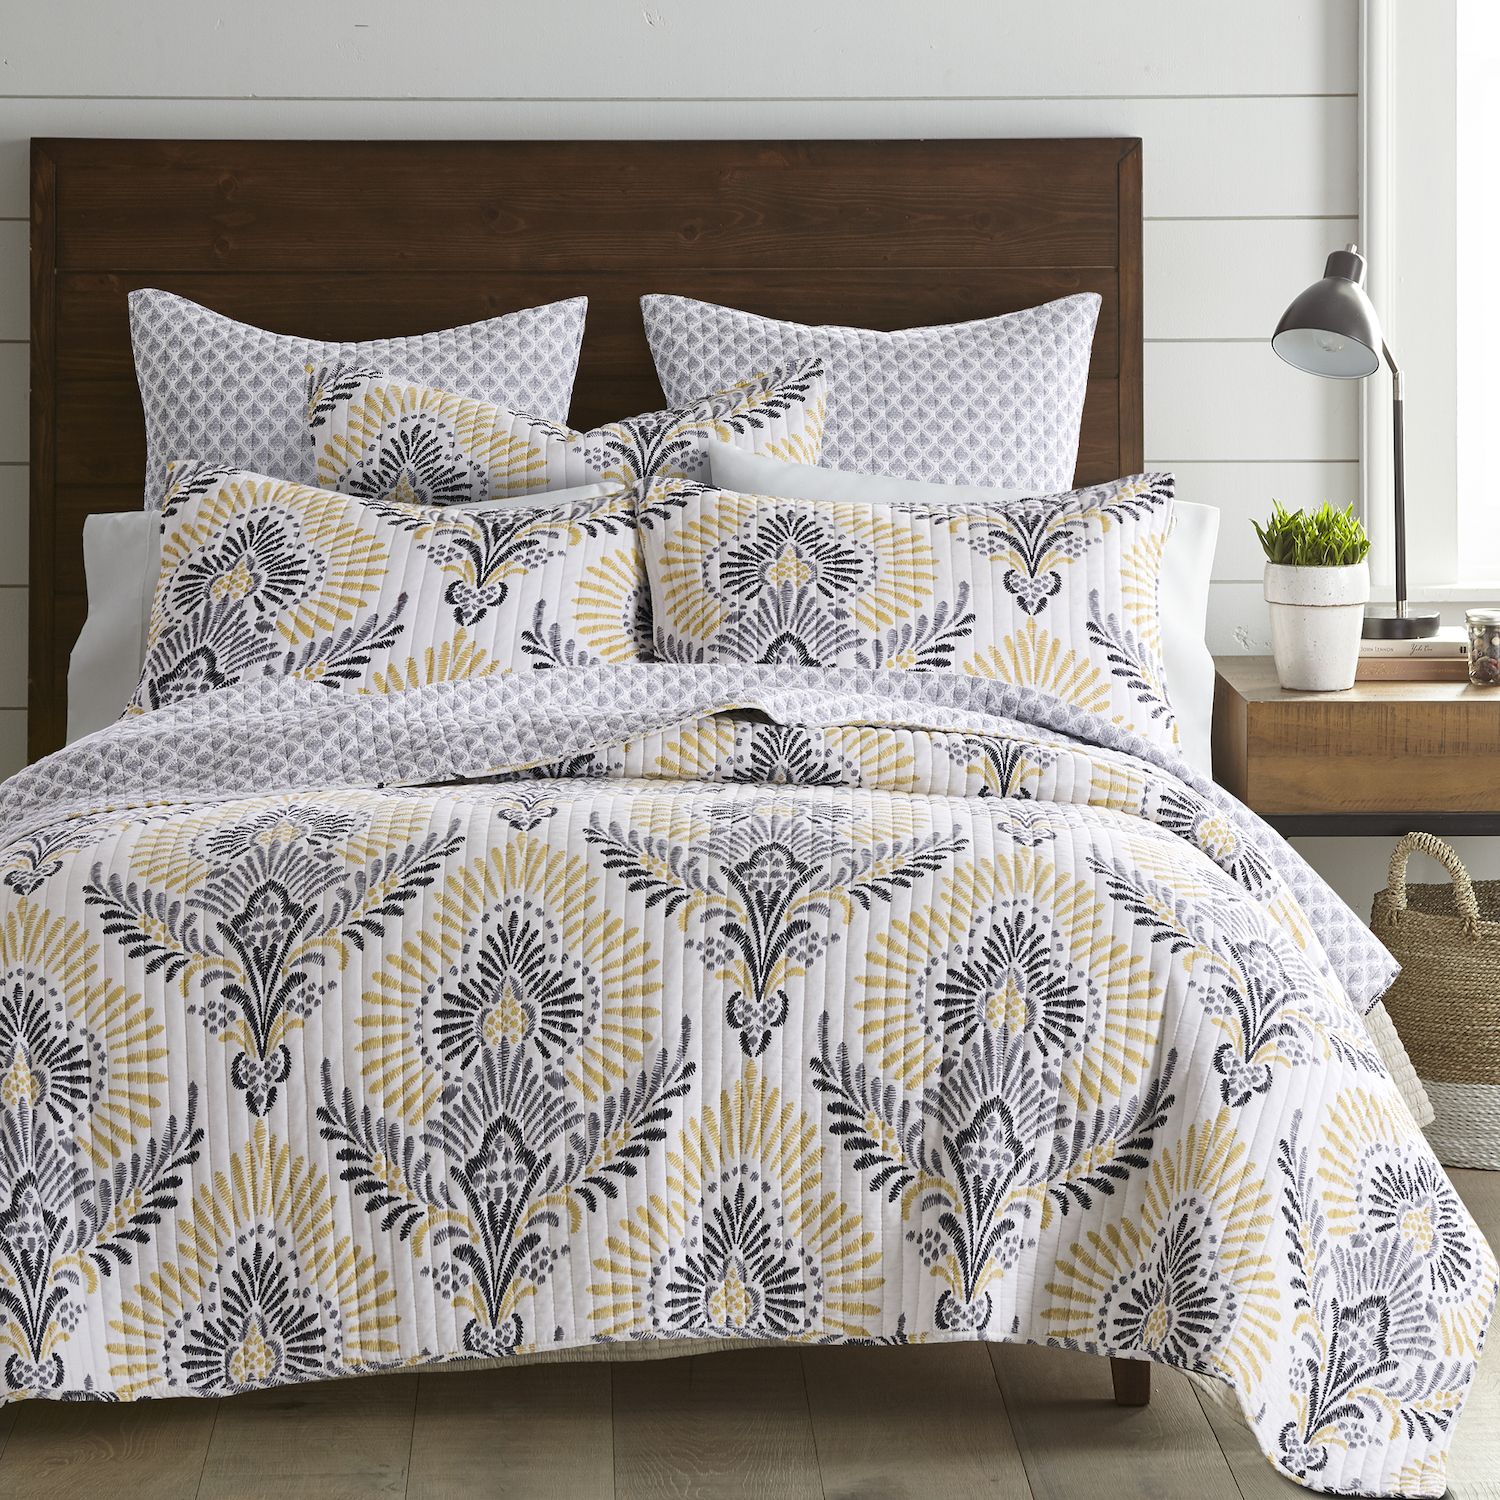 Image for Levtex Home Kiana Quilt Set at Kohl's.